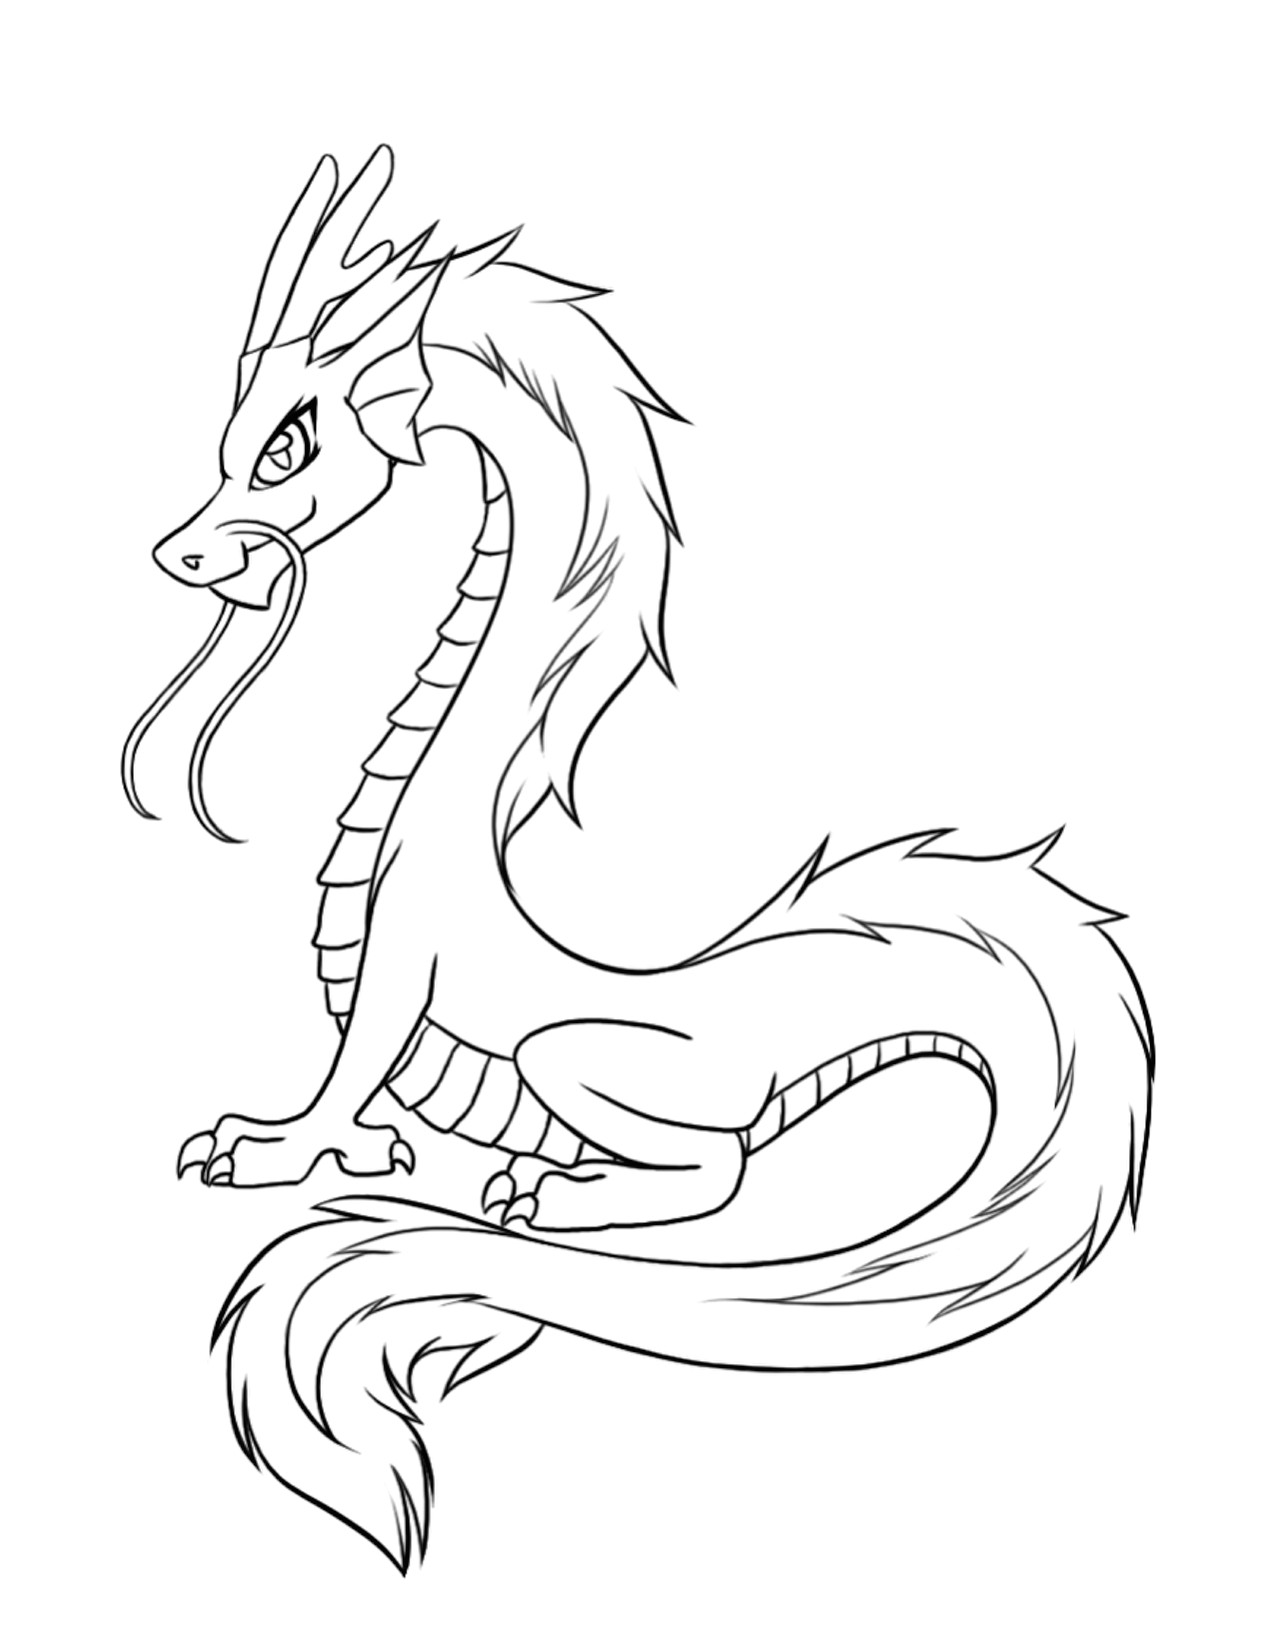 Drawings Of Baby Dragons Step by Step Free Printable Dragon Coloring Pages for Kids Dragon Sketch